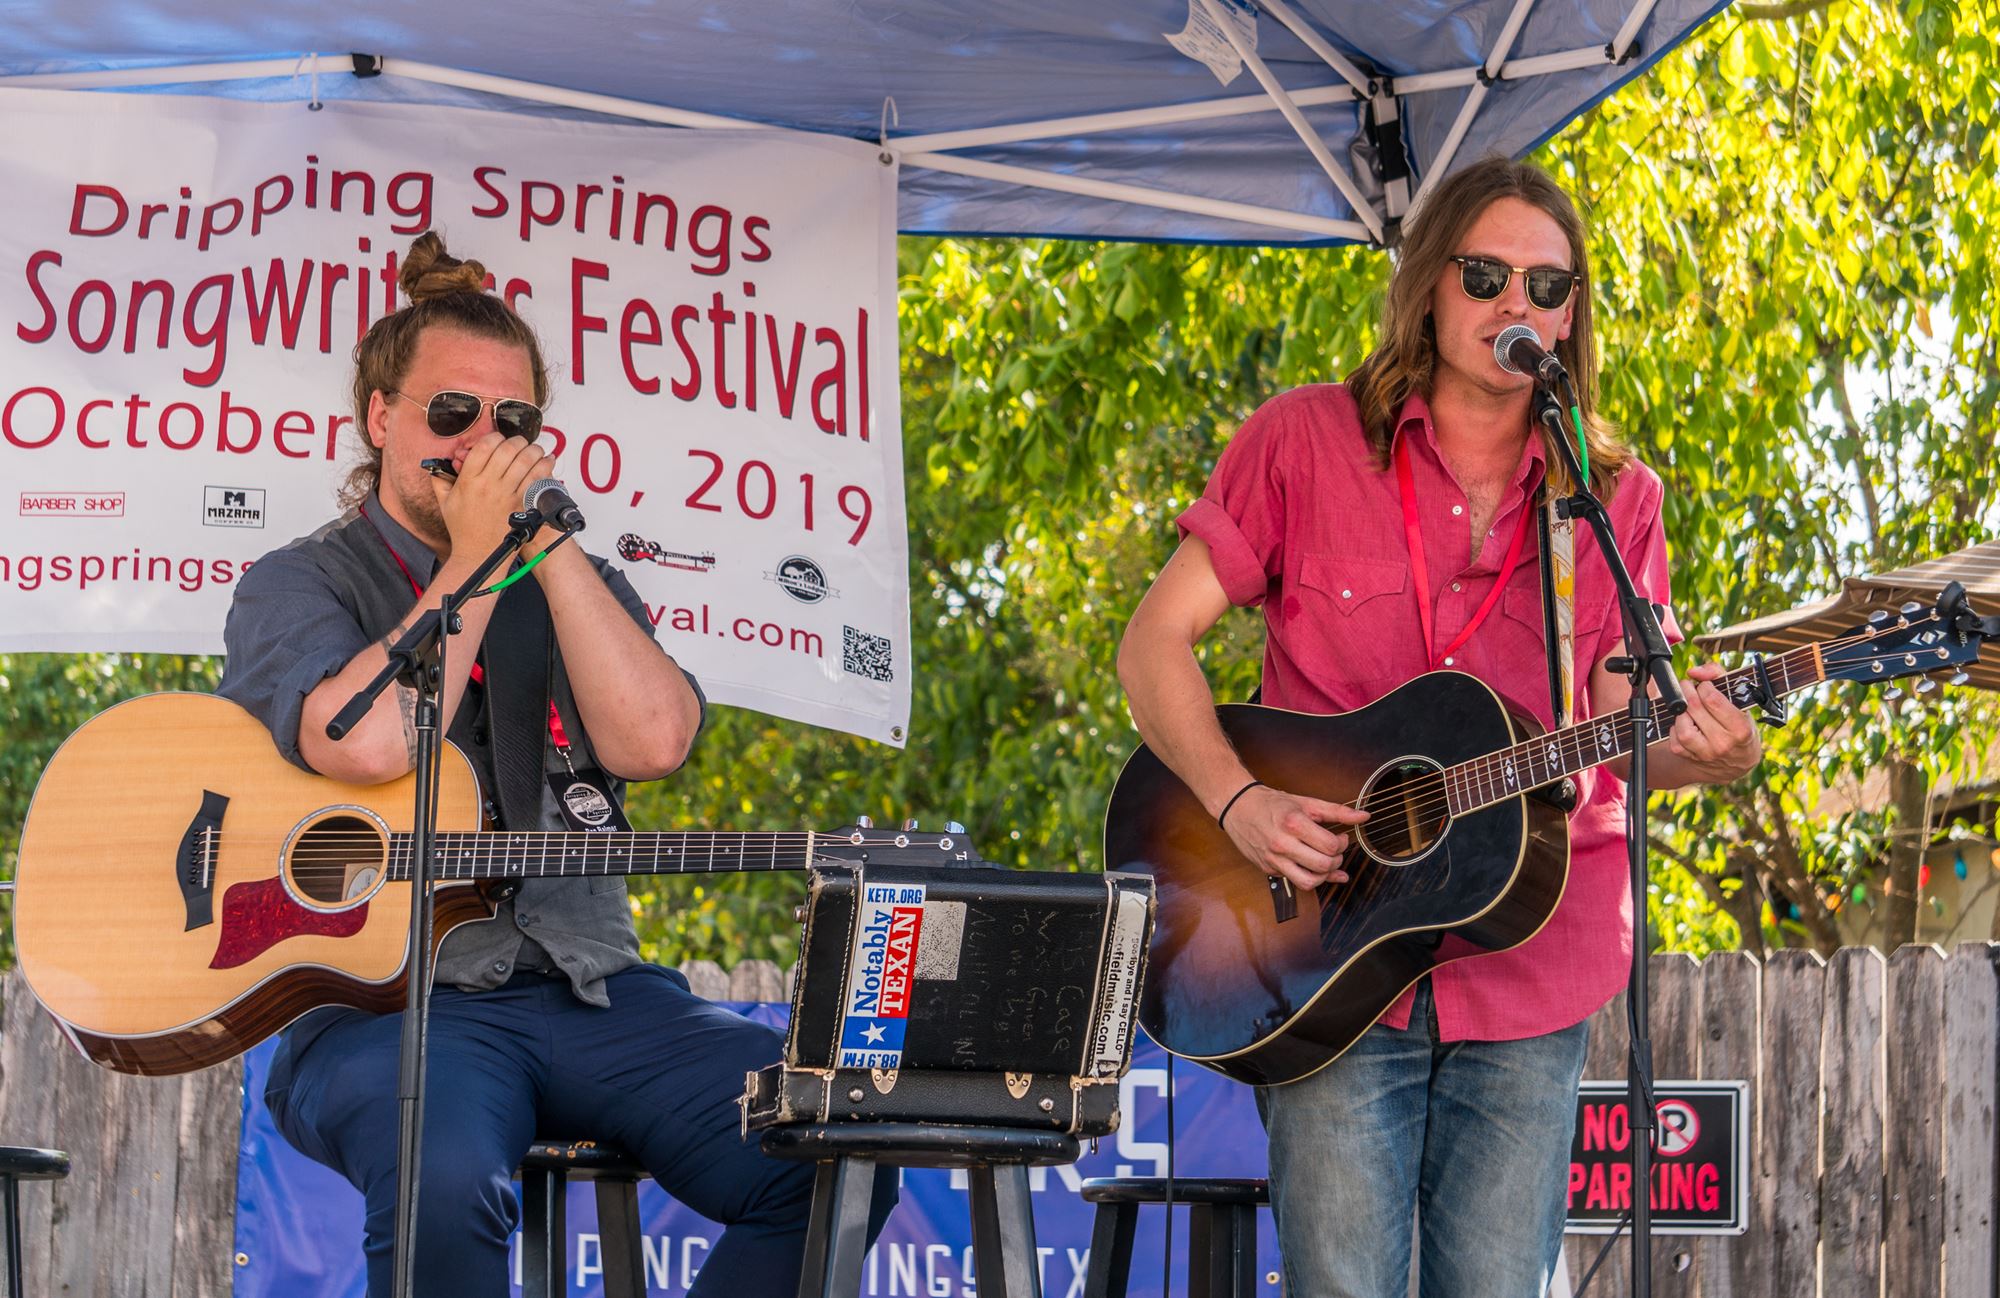 The Dripping Springs Songwriter Festival in the Heart of the Hill Country